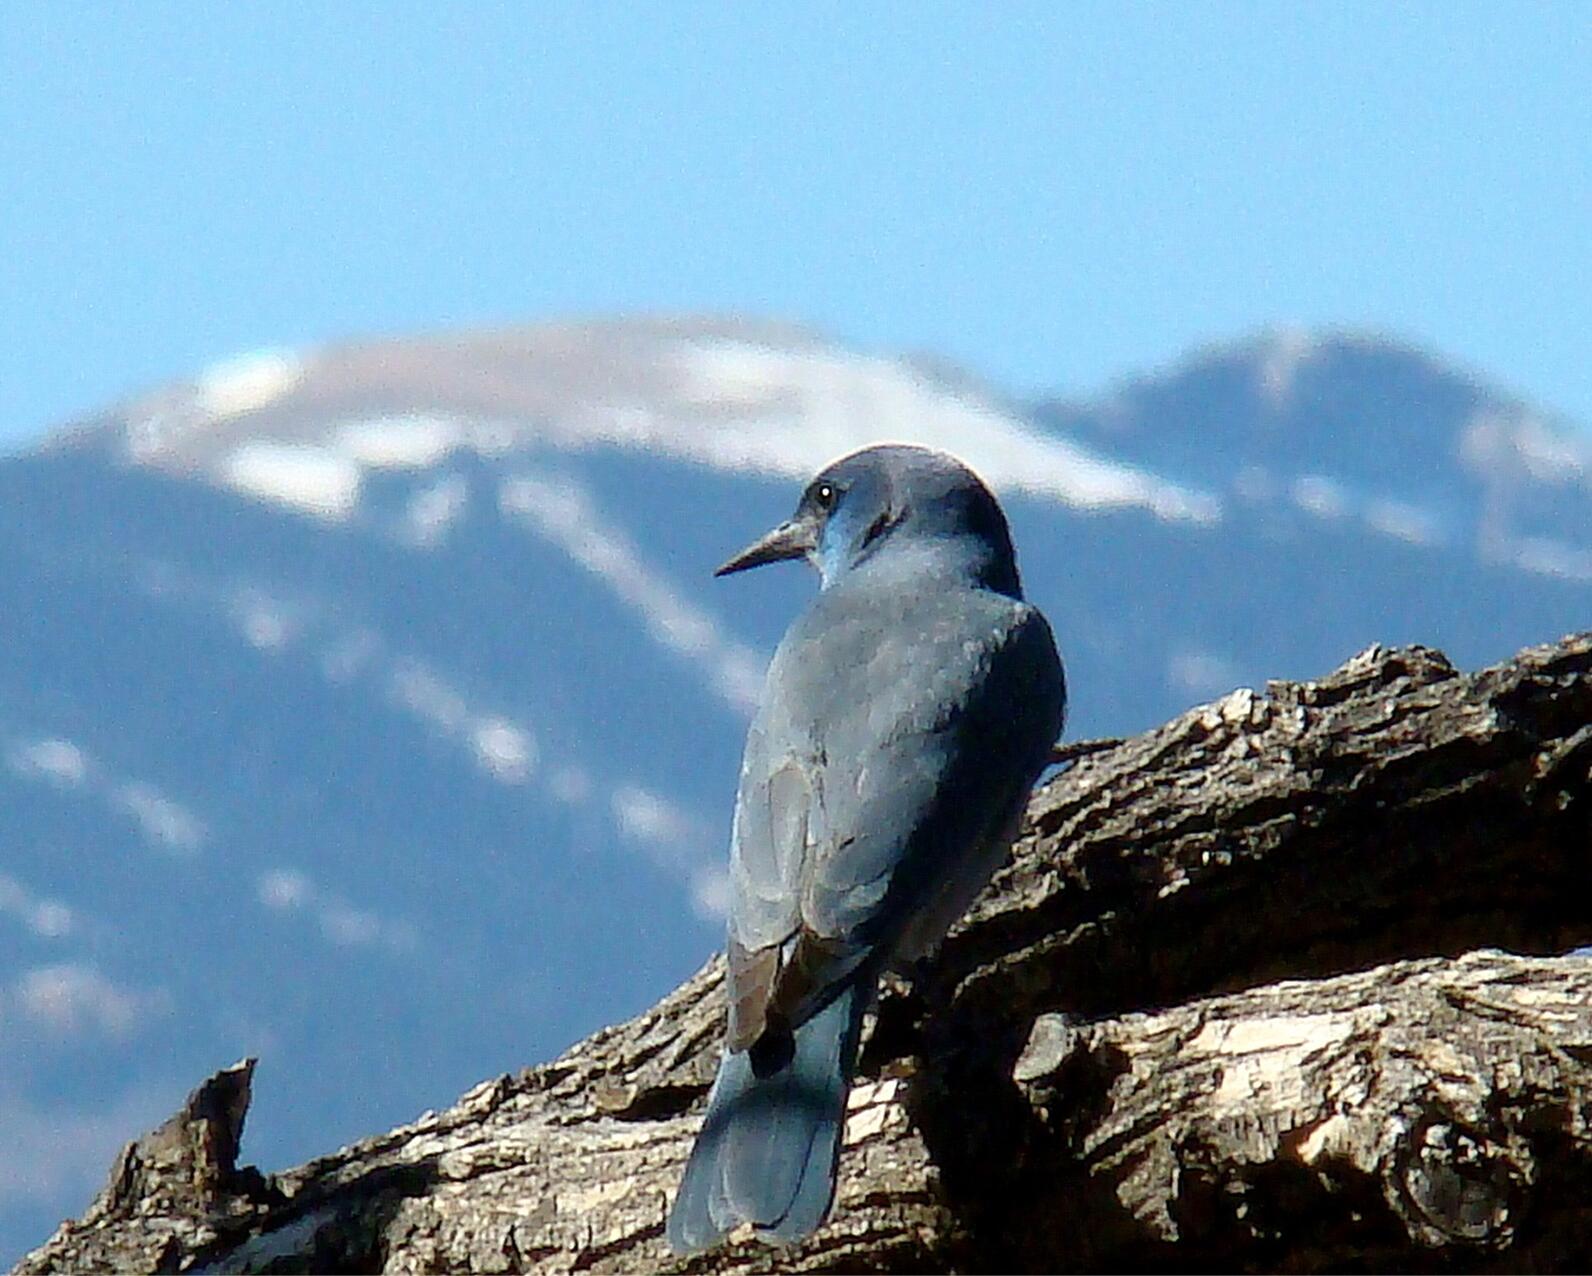 A Pinyon Jay, with its back to the camera and head turned so that its eye is visible, stands on a shaggy bare branch overlooking snow capped mountains against a blue sky.